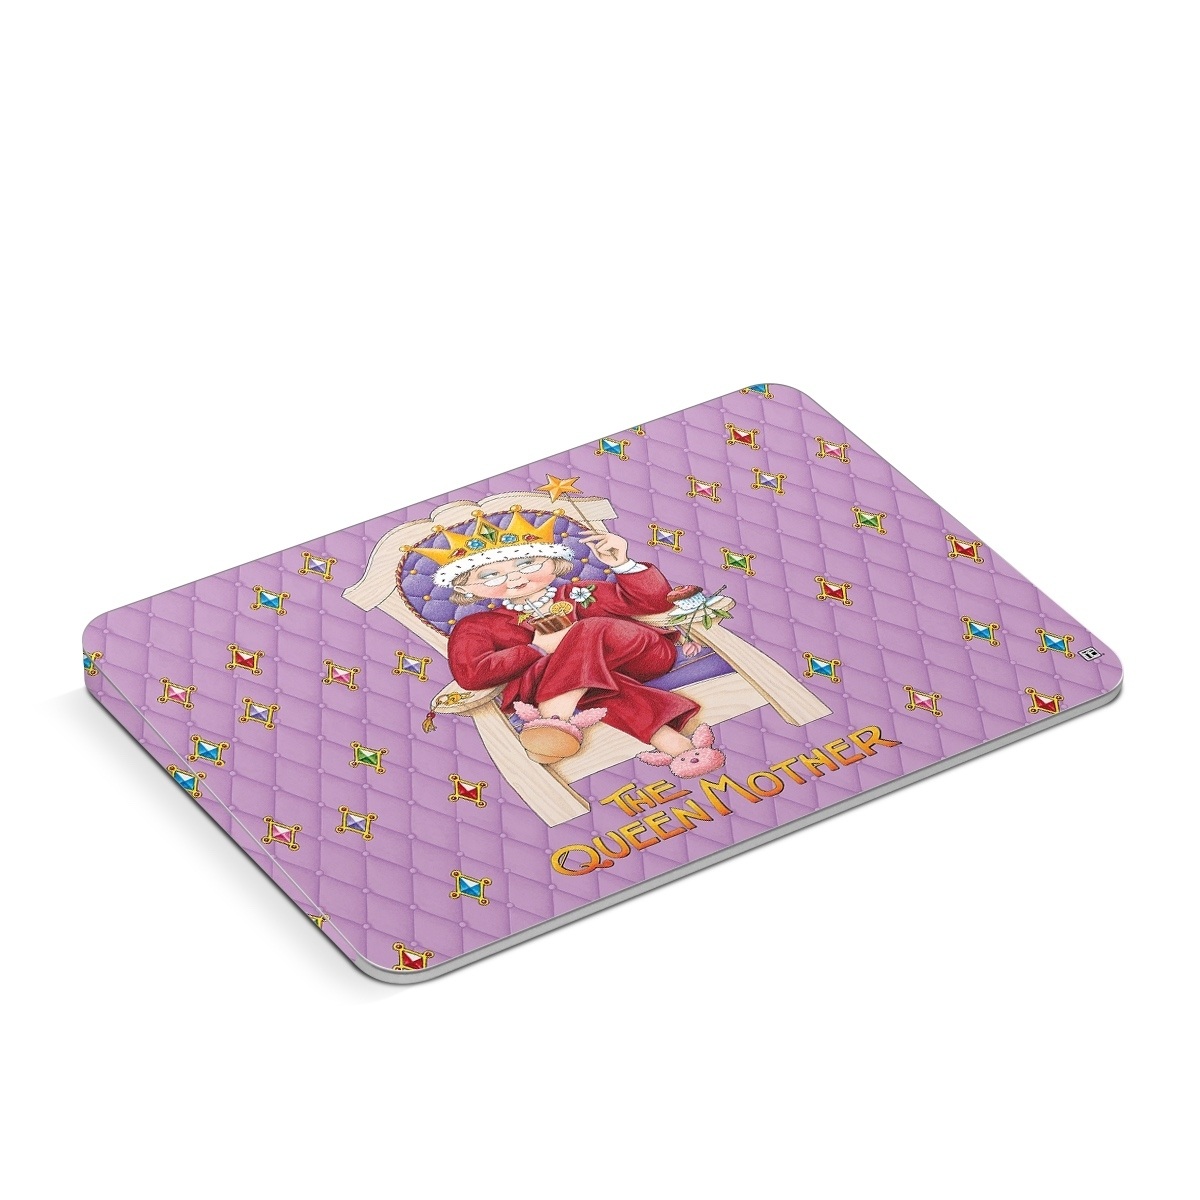 Apple Magic Trackpad Skin design of Illustration, Art, Blessing, with gray, red, green, pink, purple, orange colors